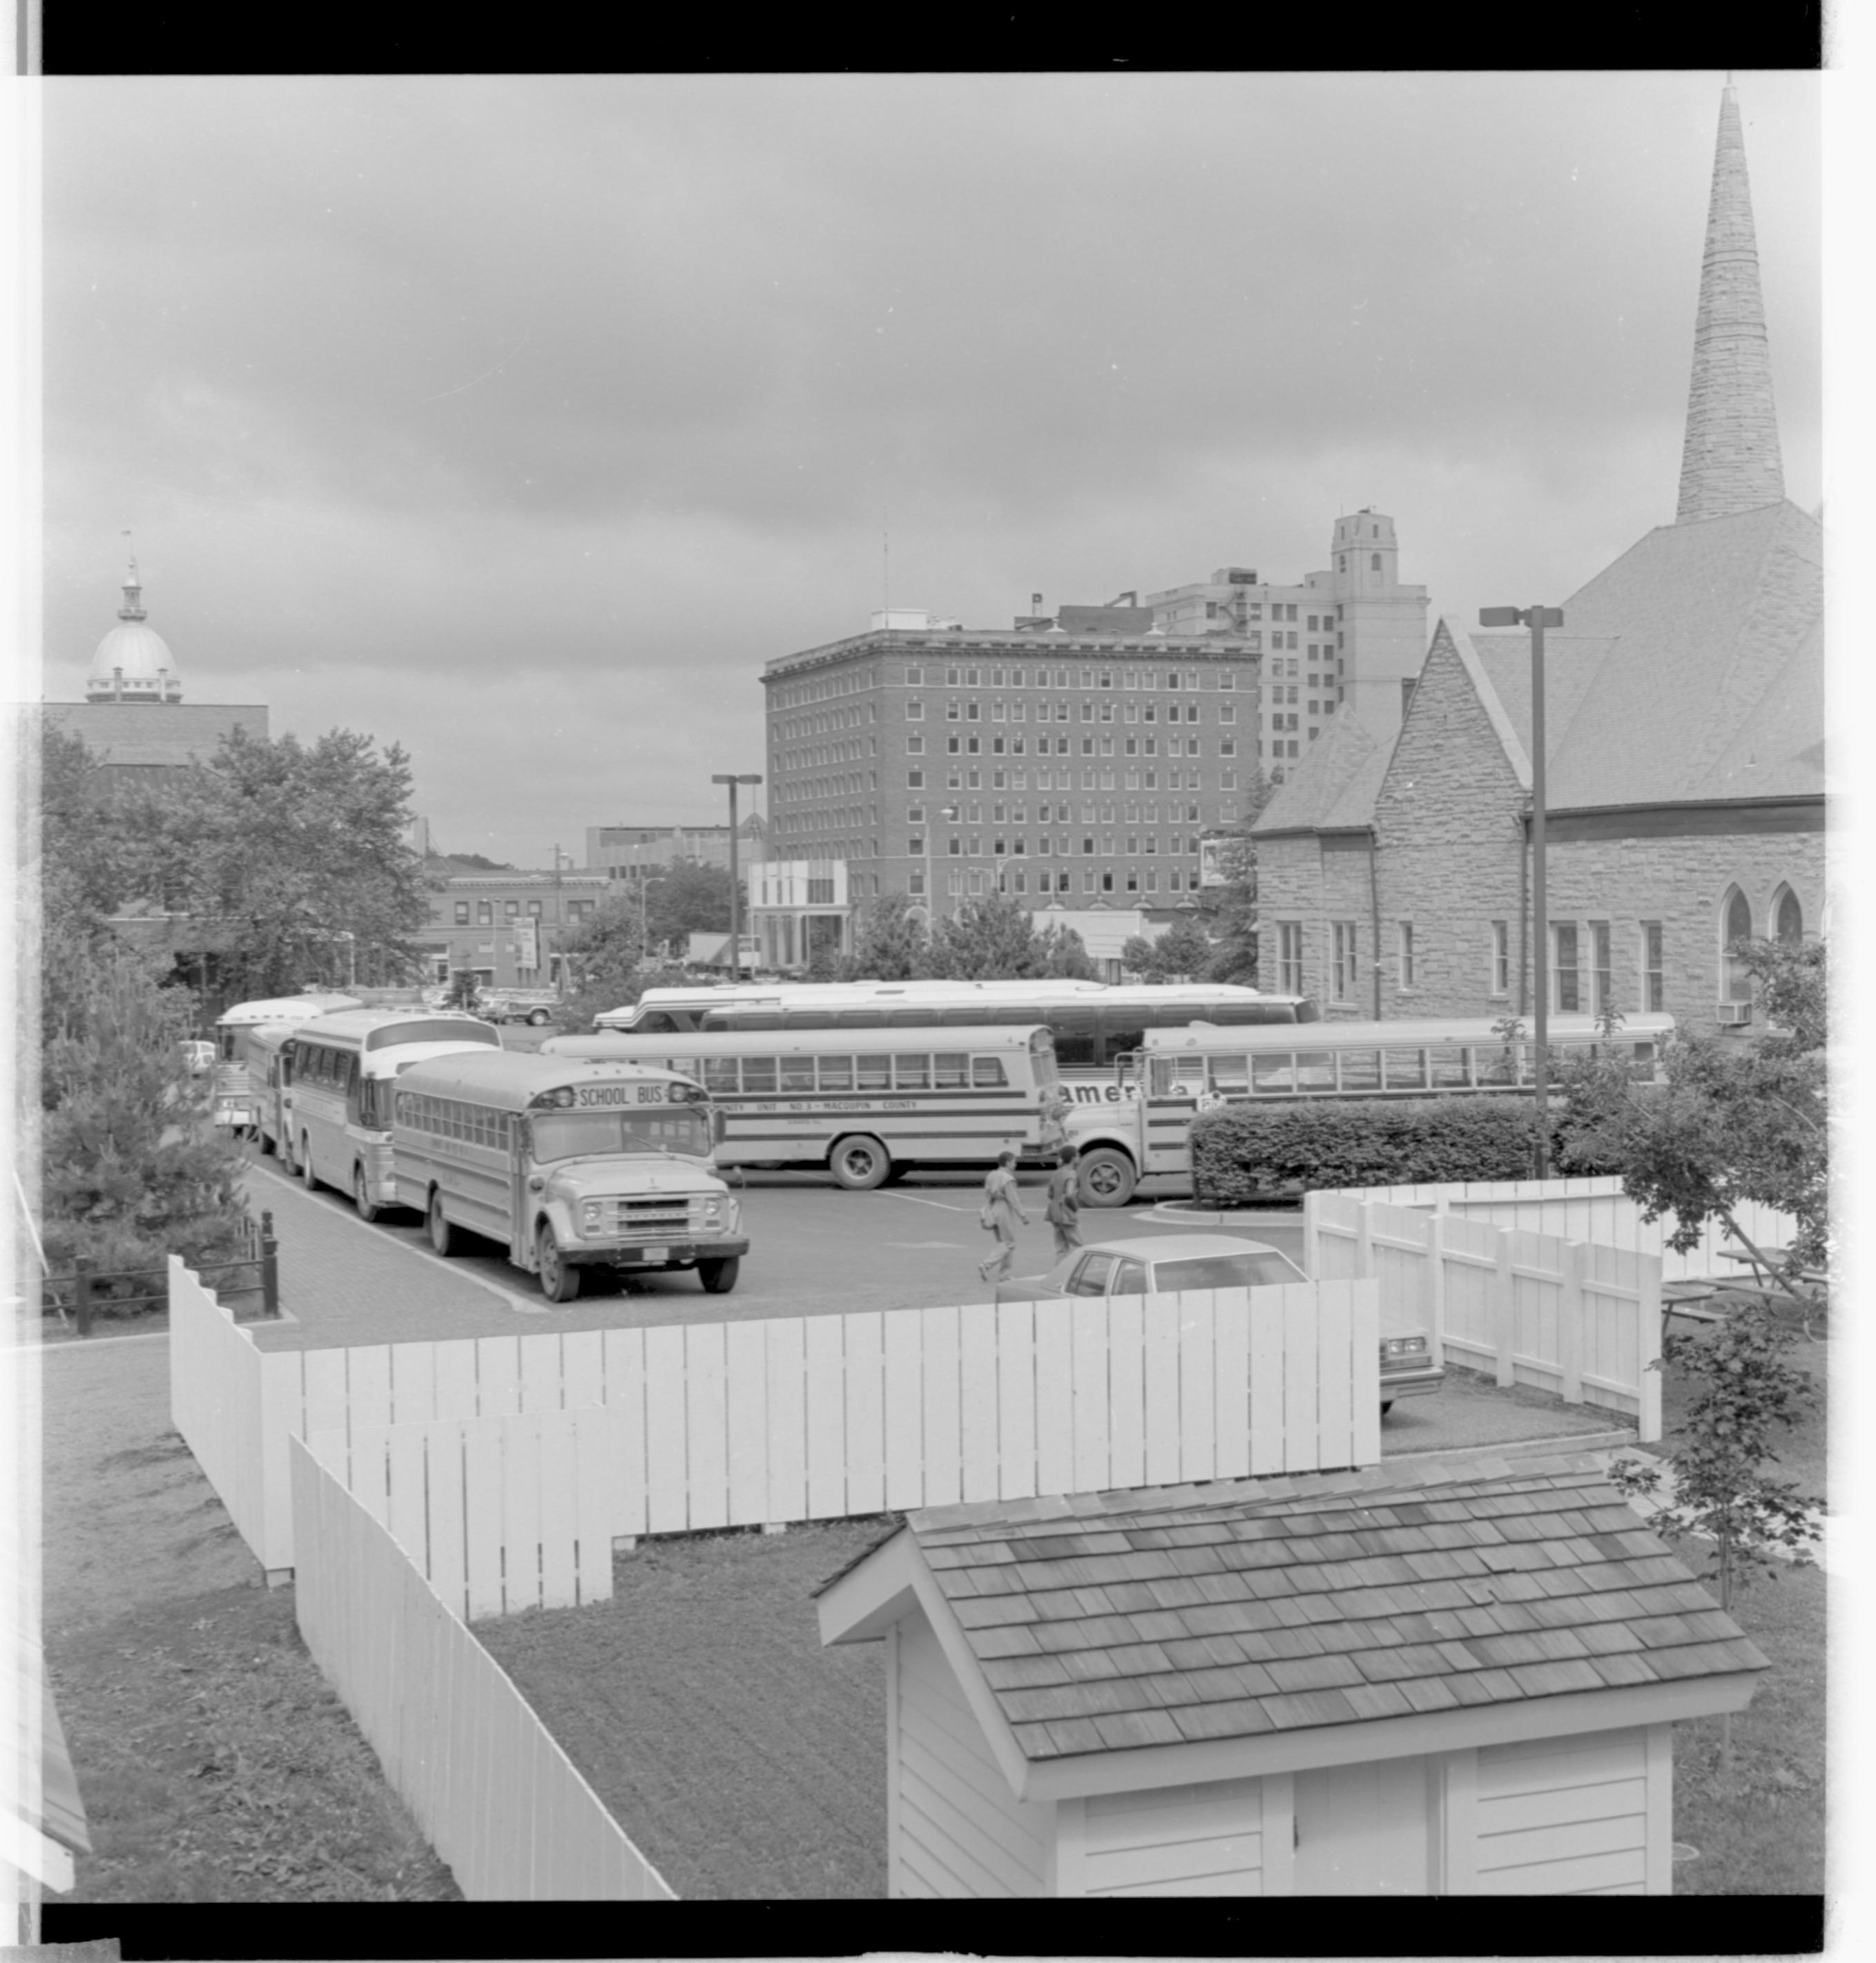 Parking lots - Bus Lot, Grace Lutheran Church on right, Lyon House shed in foreground, former Leland Hotel in background center, Capitol Dome on left looking Northwest Bus, Parking Lot, Grace Lutheran Church, Lyon Shed